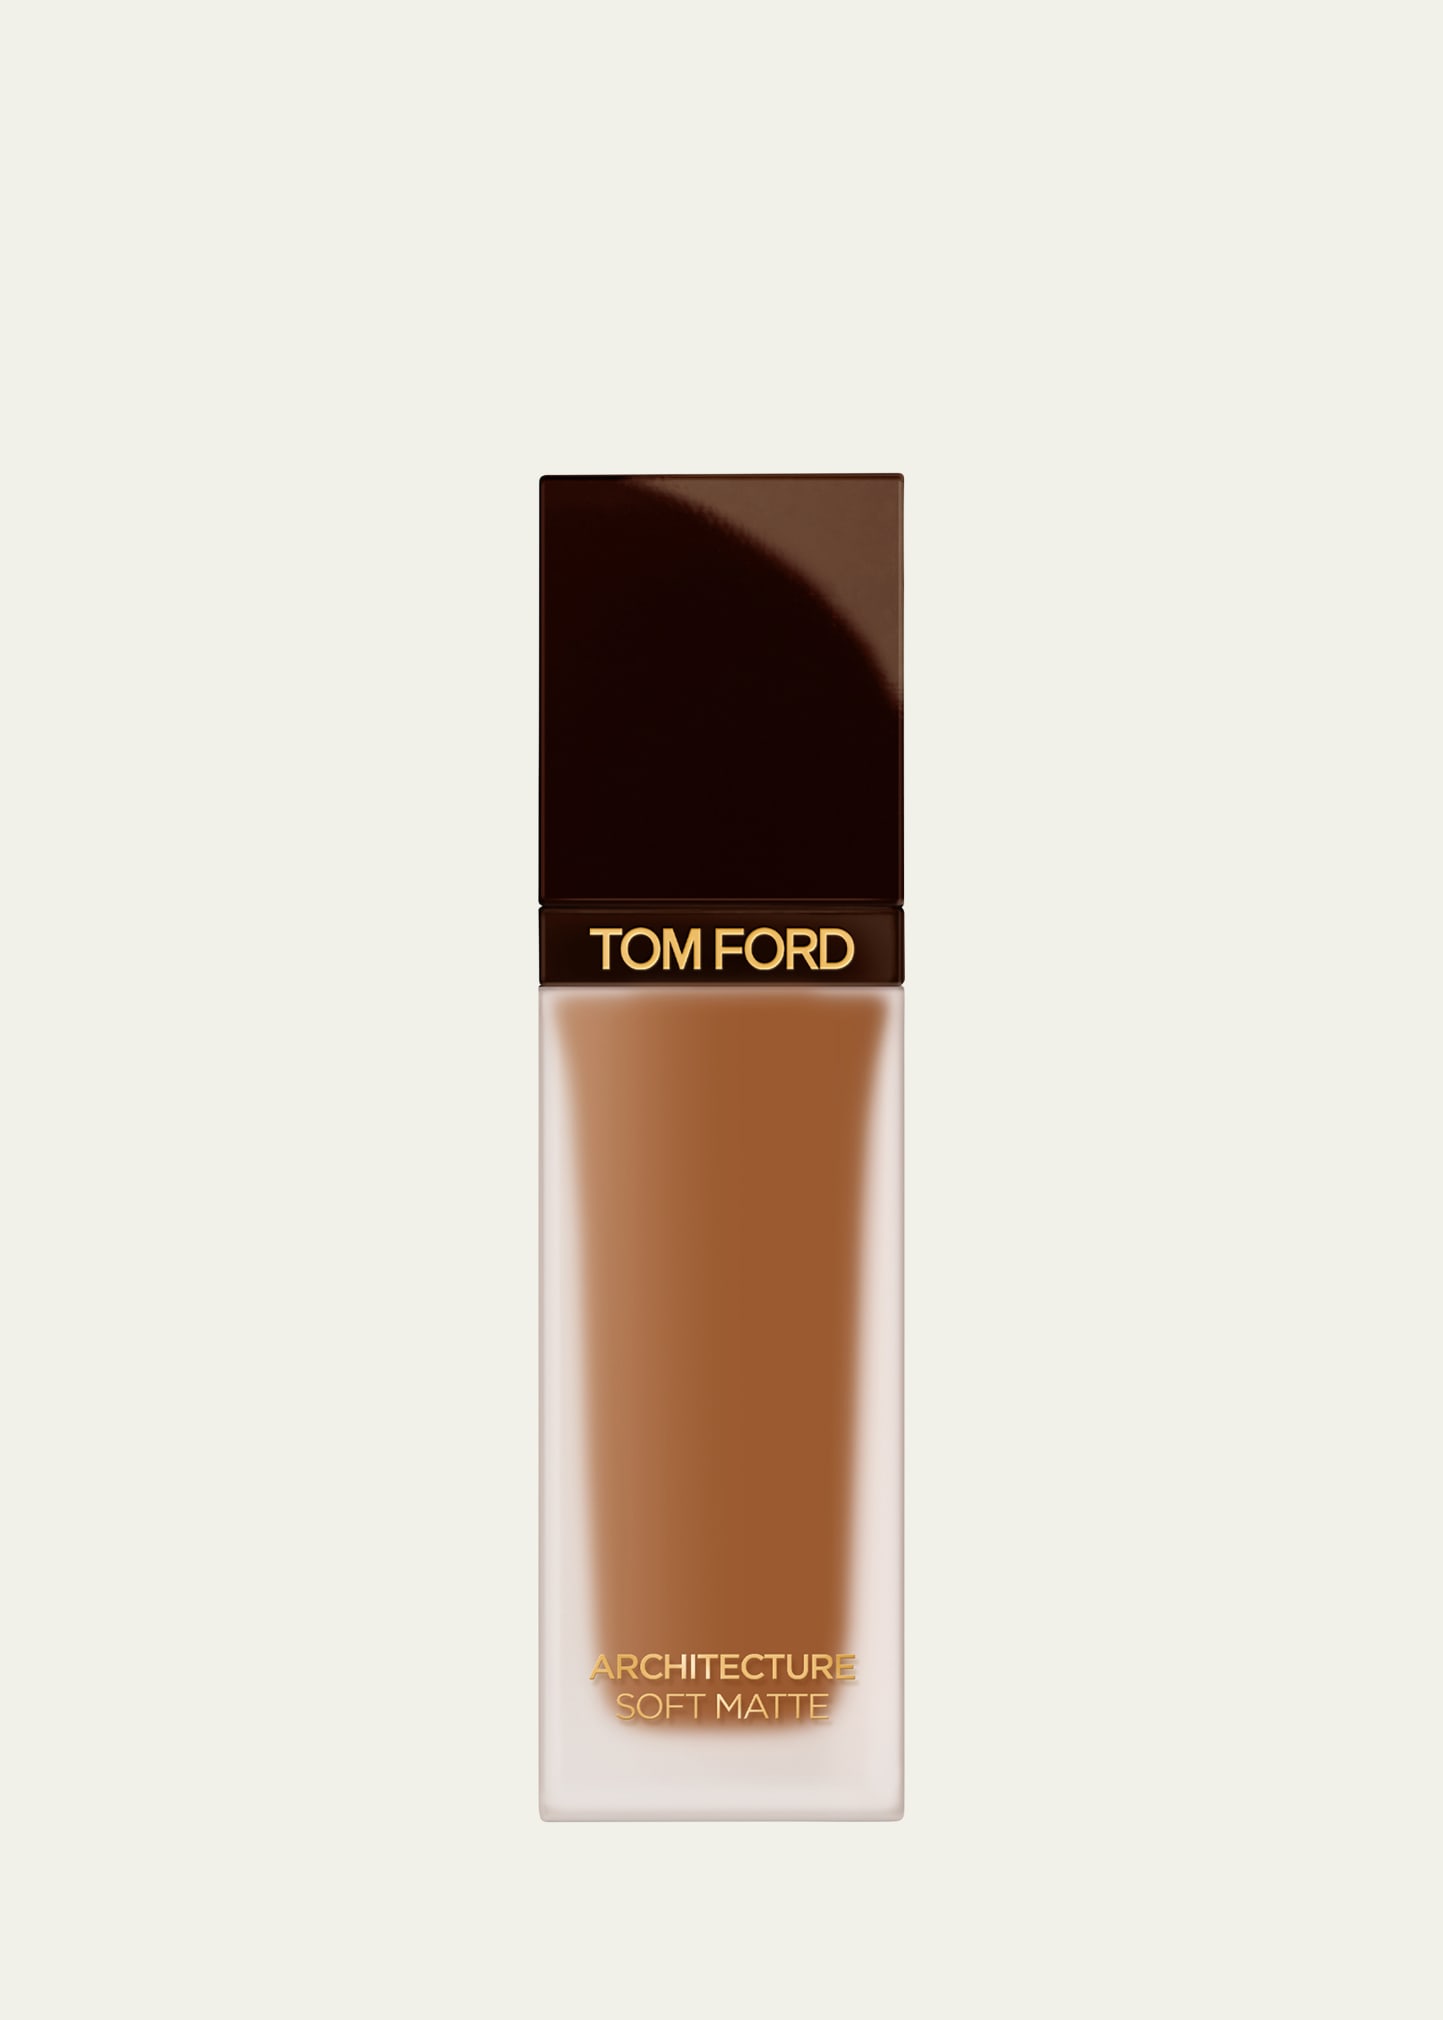 Tom Ford Architecture Soft Matte Foundation In Asm - 10.7 Amber